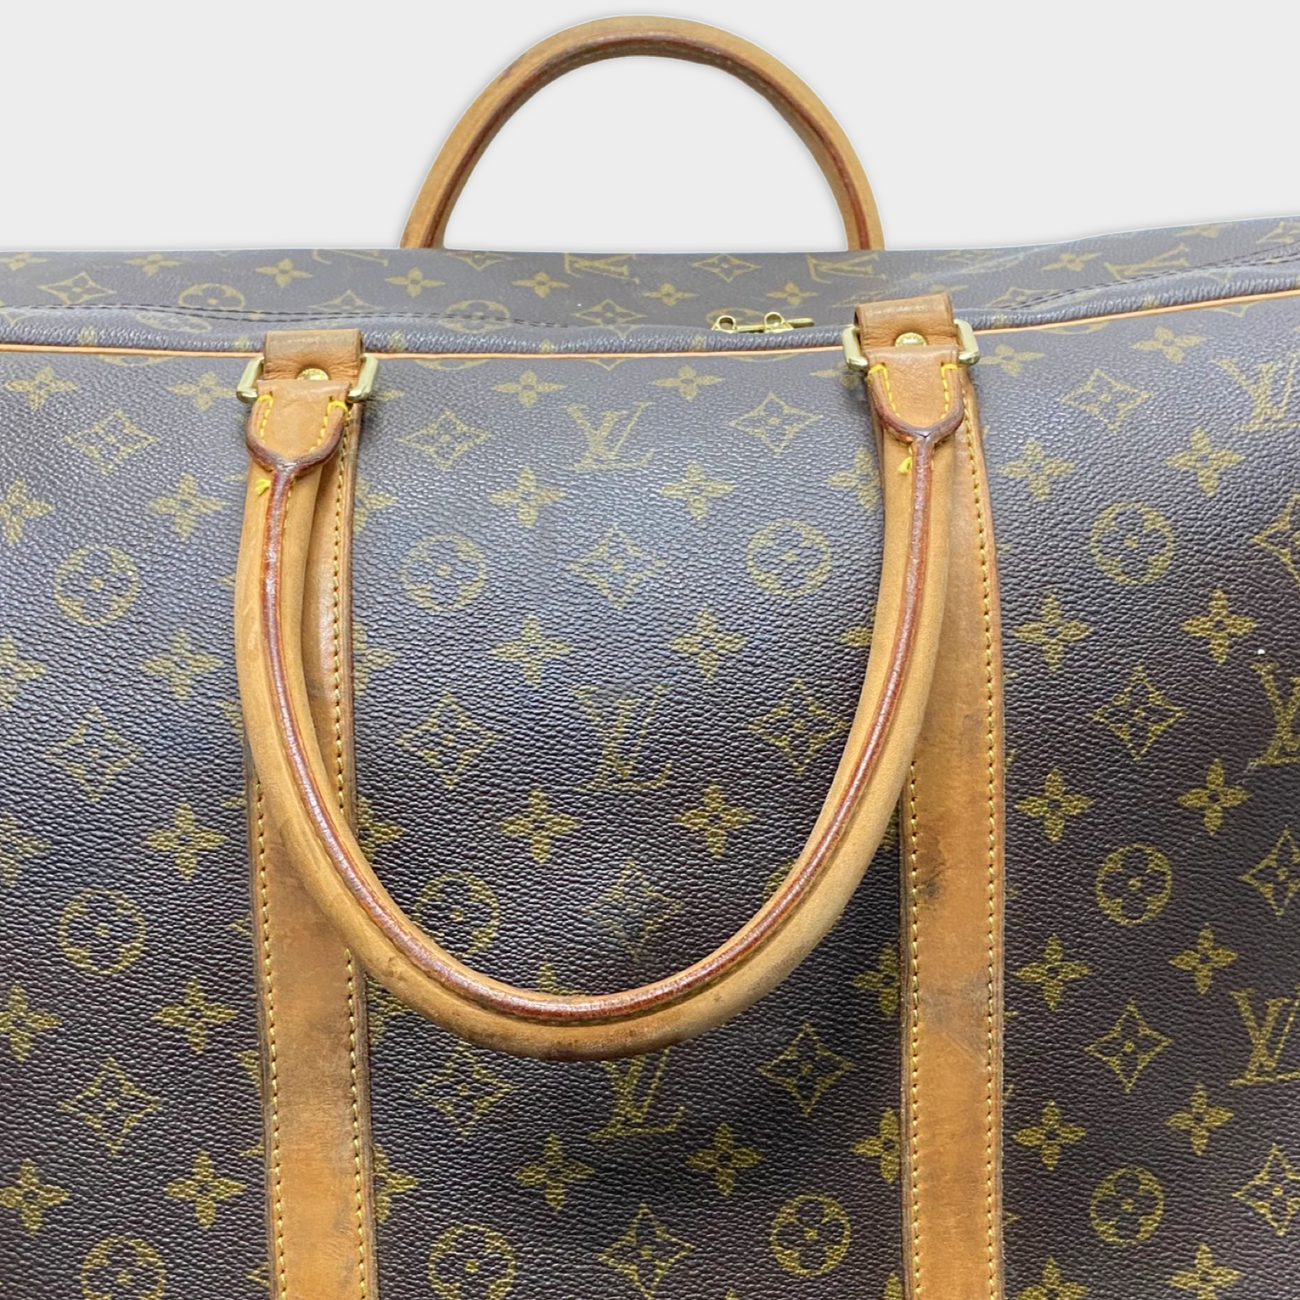 Louis Vuitton 1990-2000s Pre-Owned Bisten 50 Travel Bag - Brown